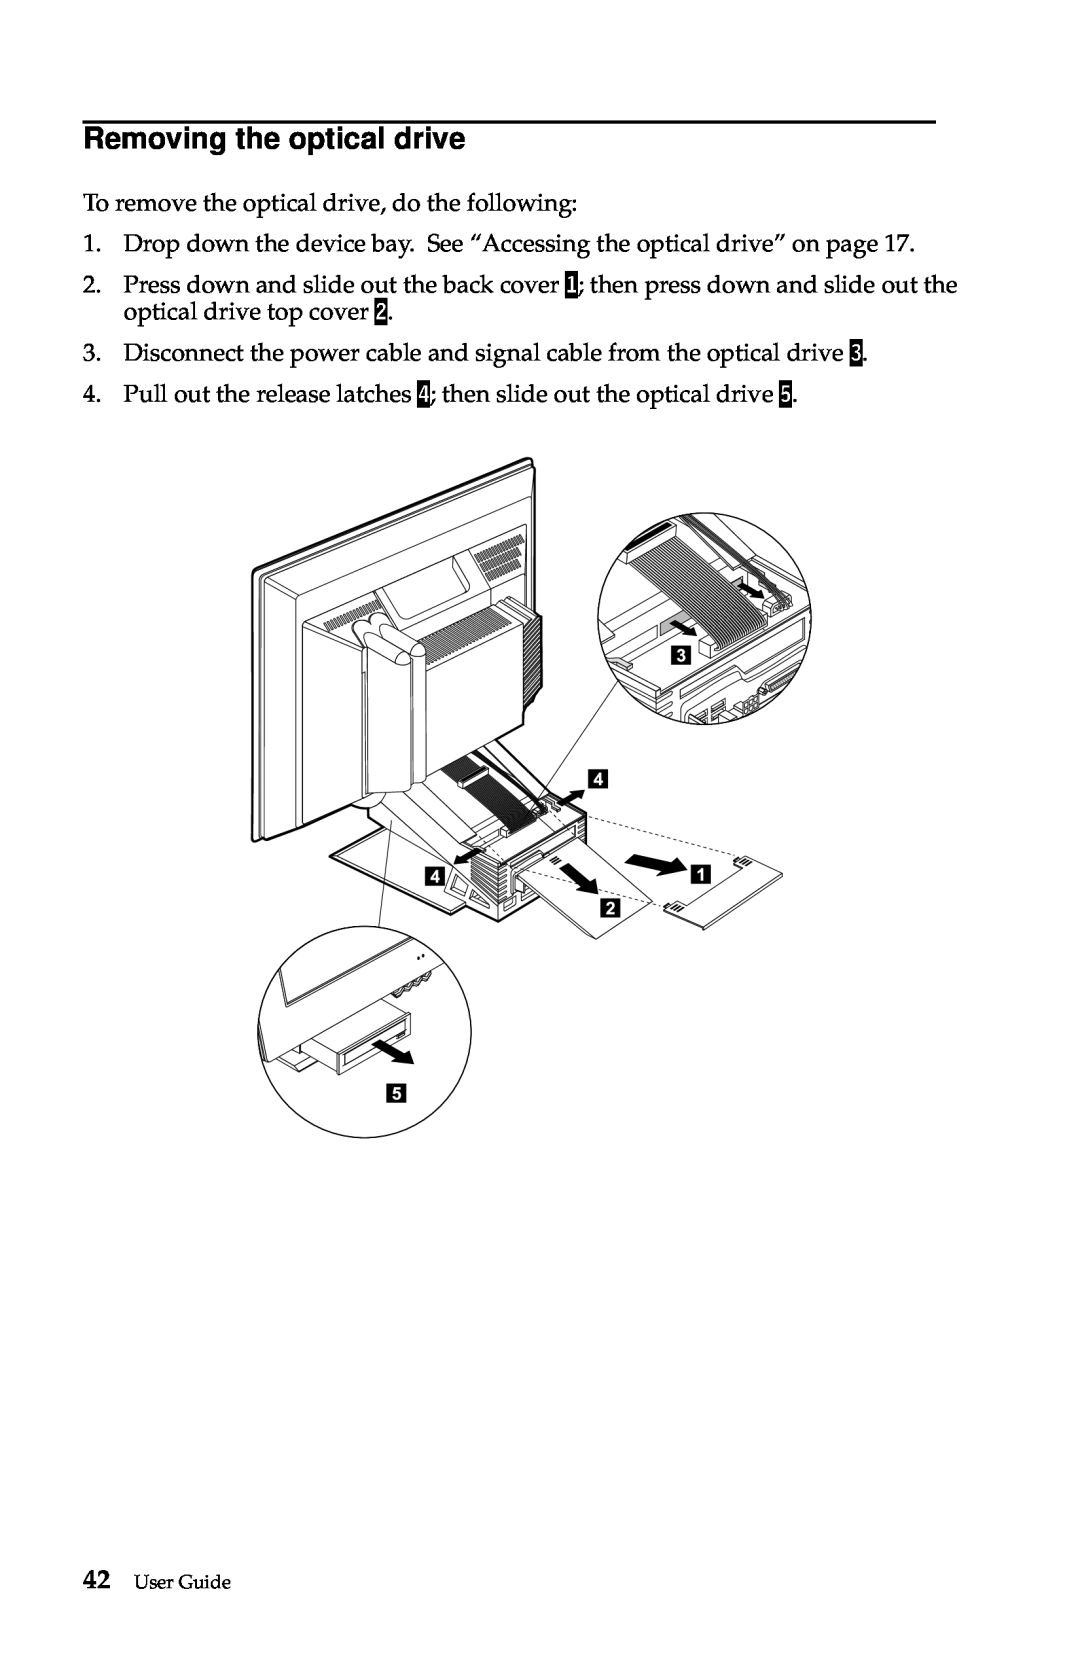 IBM 6274, 2283 manual Removing the optical drive, To remove the optical drive, do the following, User Guide 